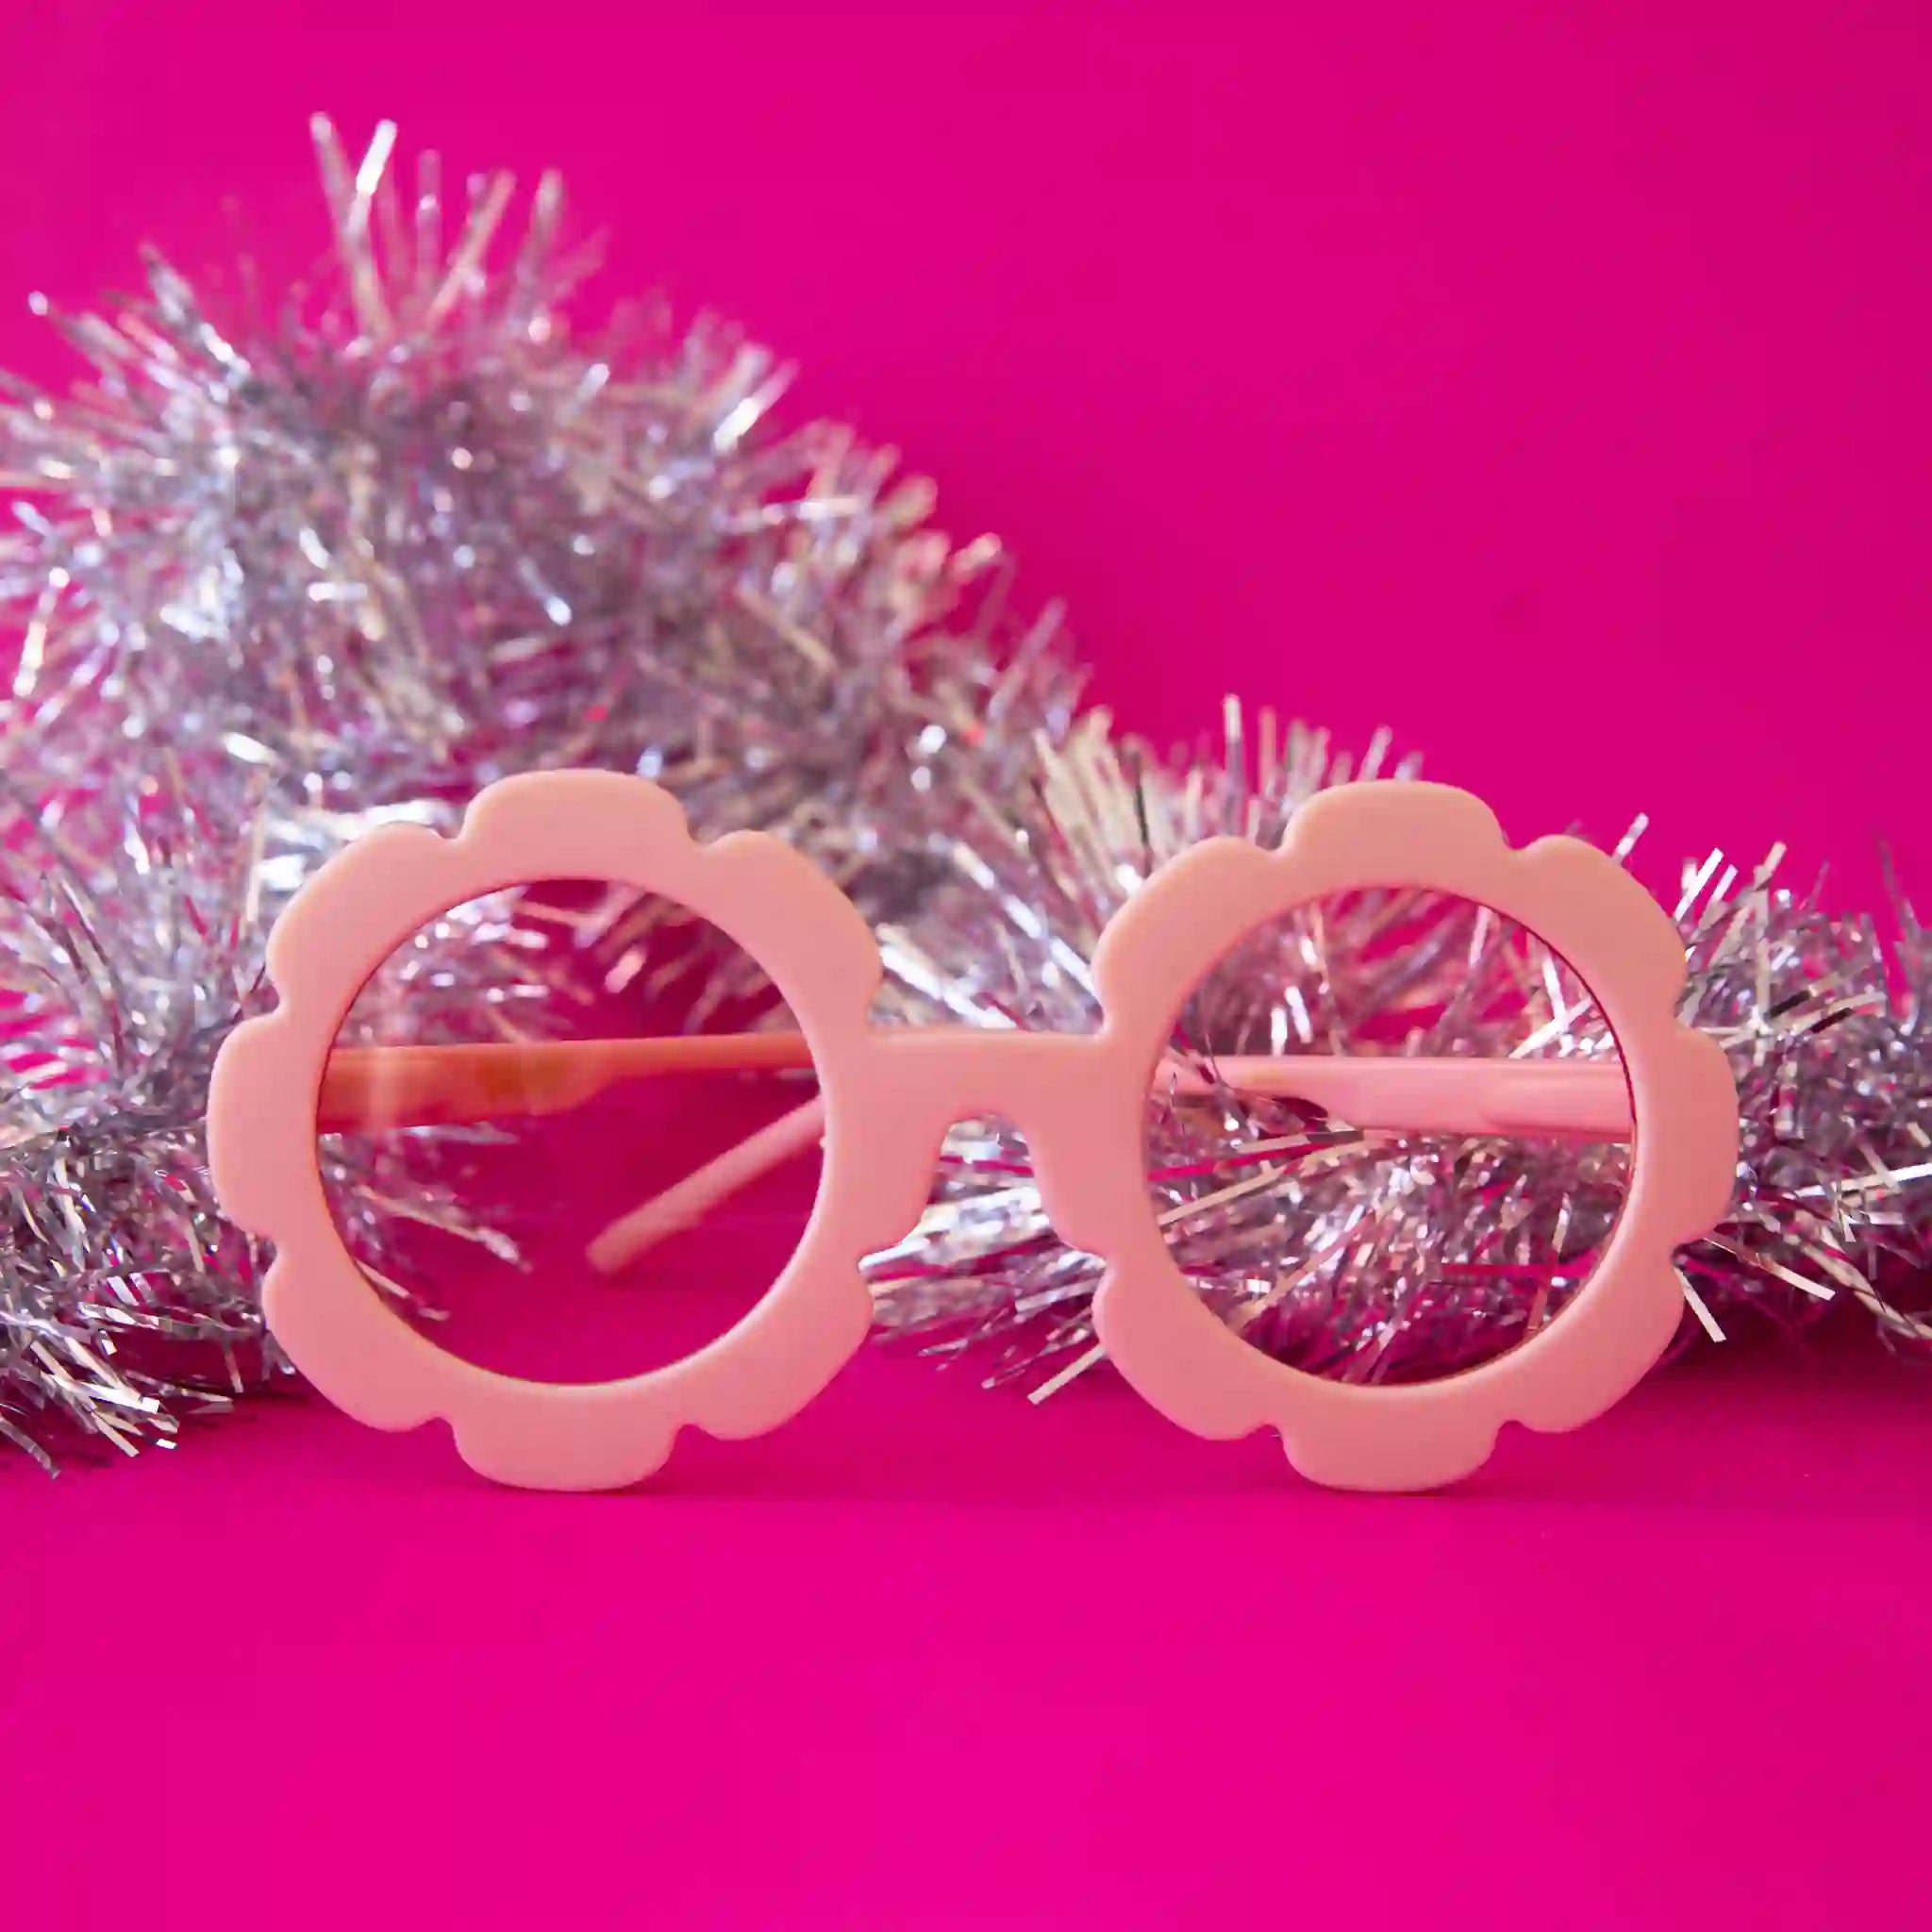 On a pink background is a light pink pair of flower shaped sunglasses with a light pink lens.